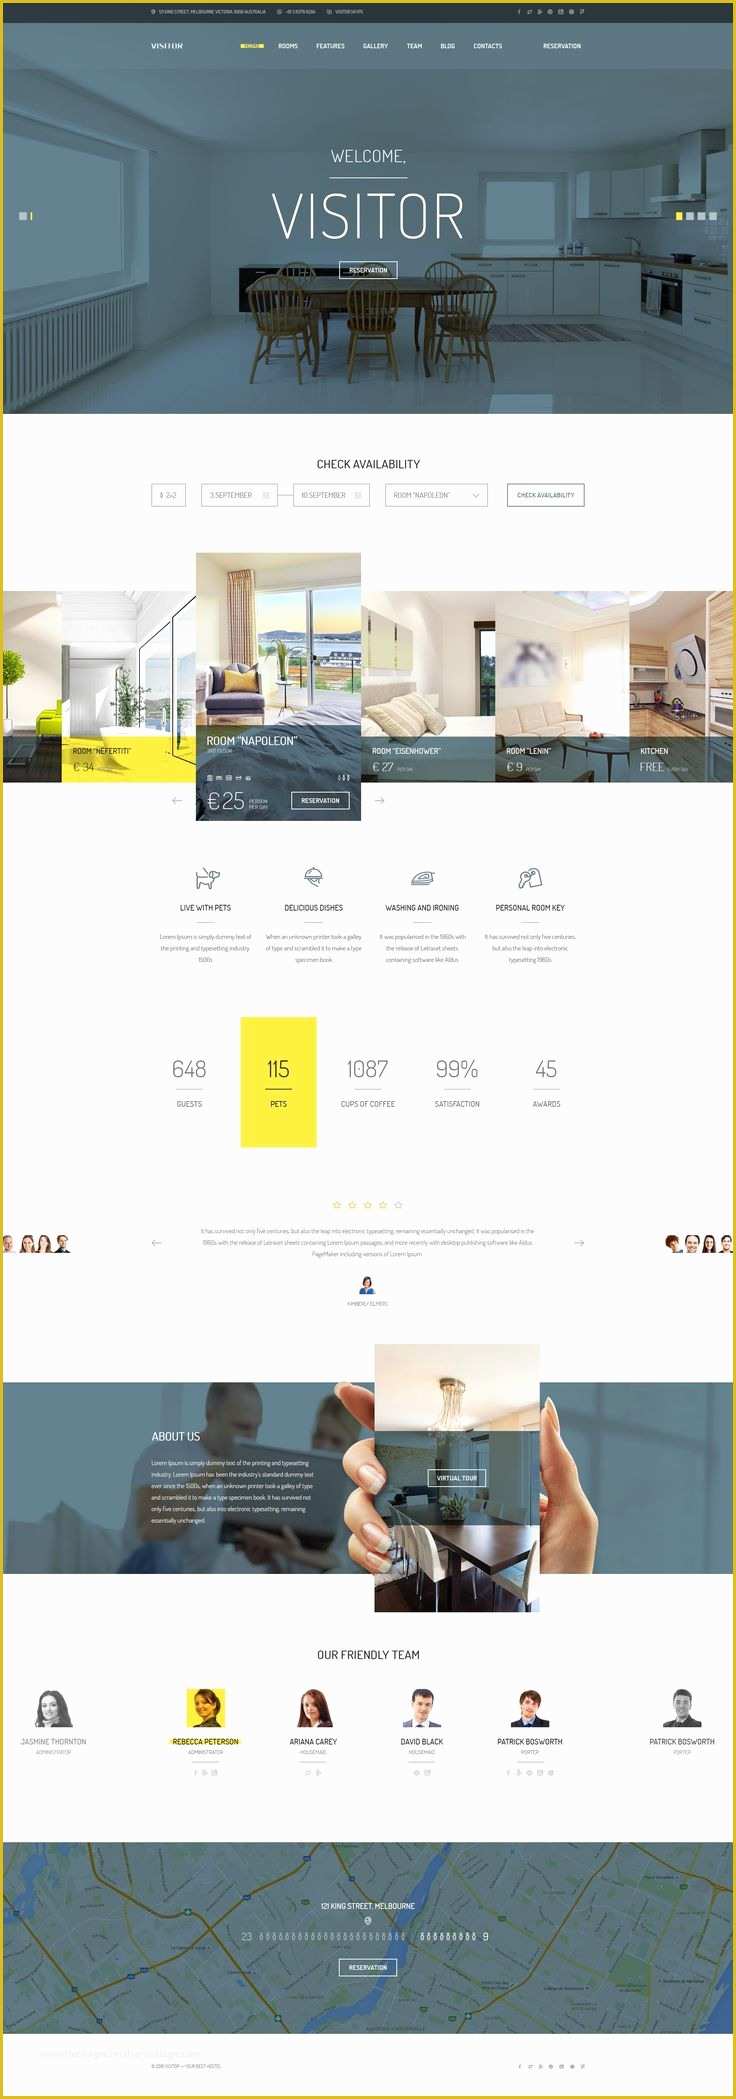 Travel Booking Website Templates Free Download Of 1000 Ideas About Modern Hotel Room On Pinterest